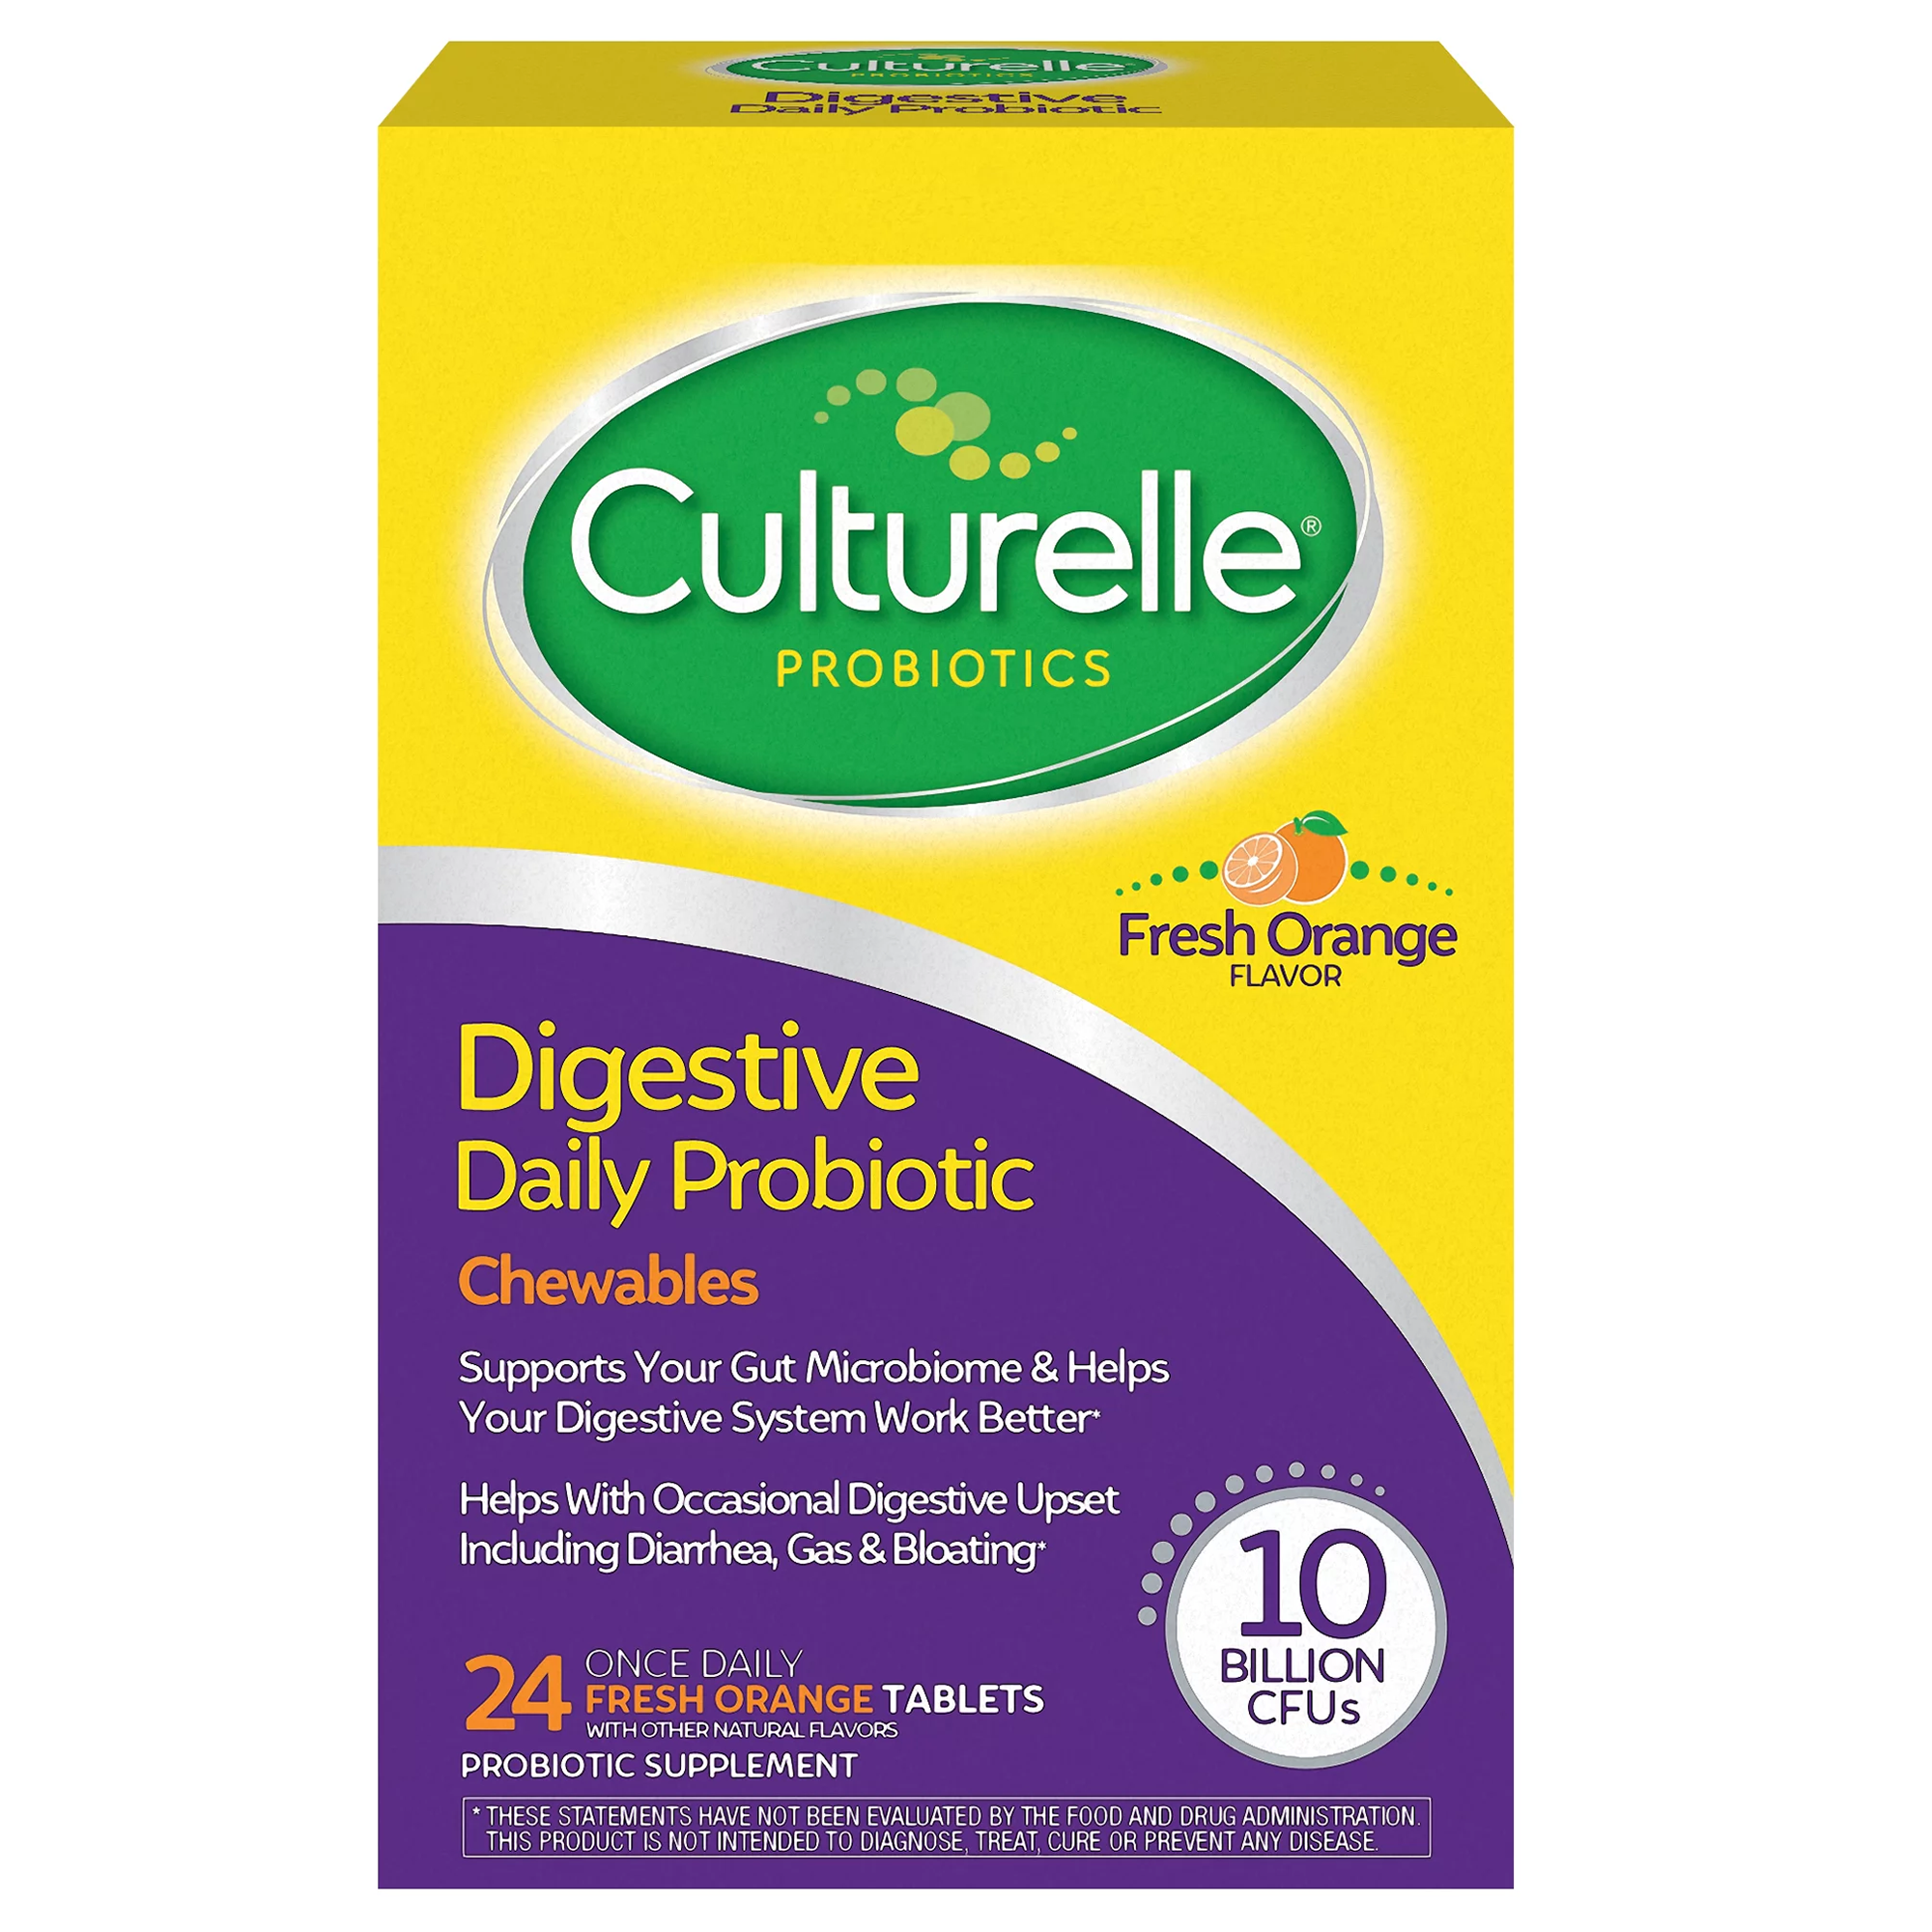 Culturelle Digestive Daily Probiotic Chewable Tablets for Digestive Health, Fresh Orange, 24 Count - image 1 of 10